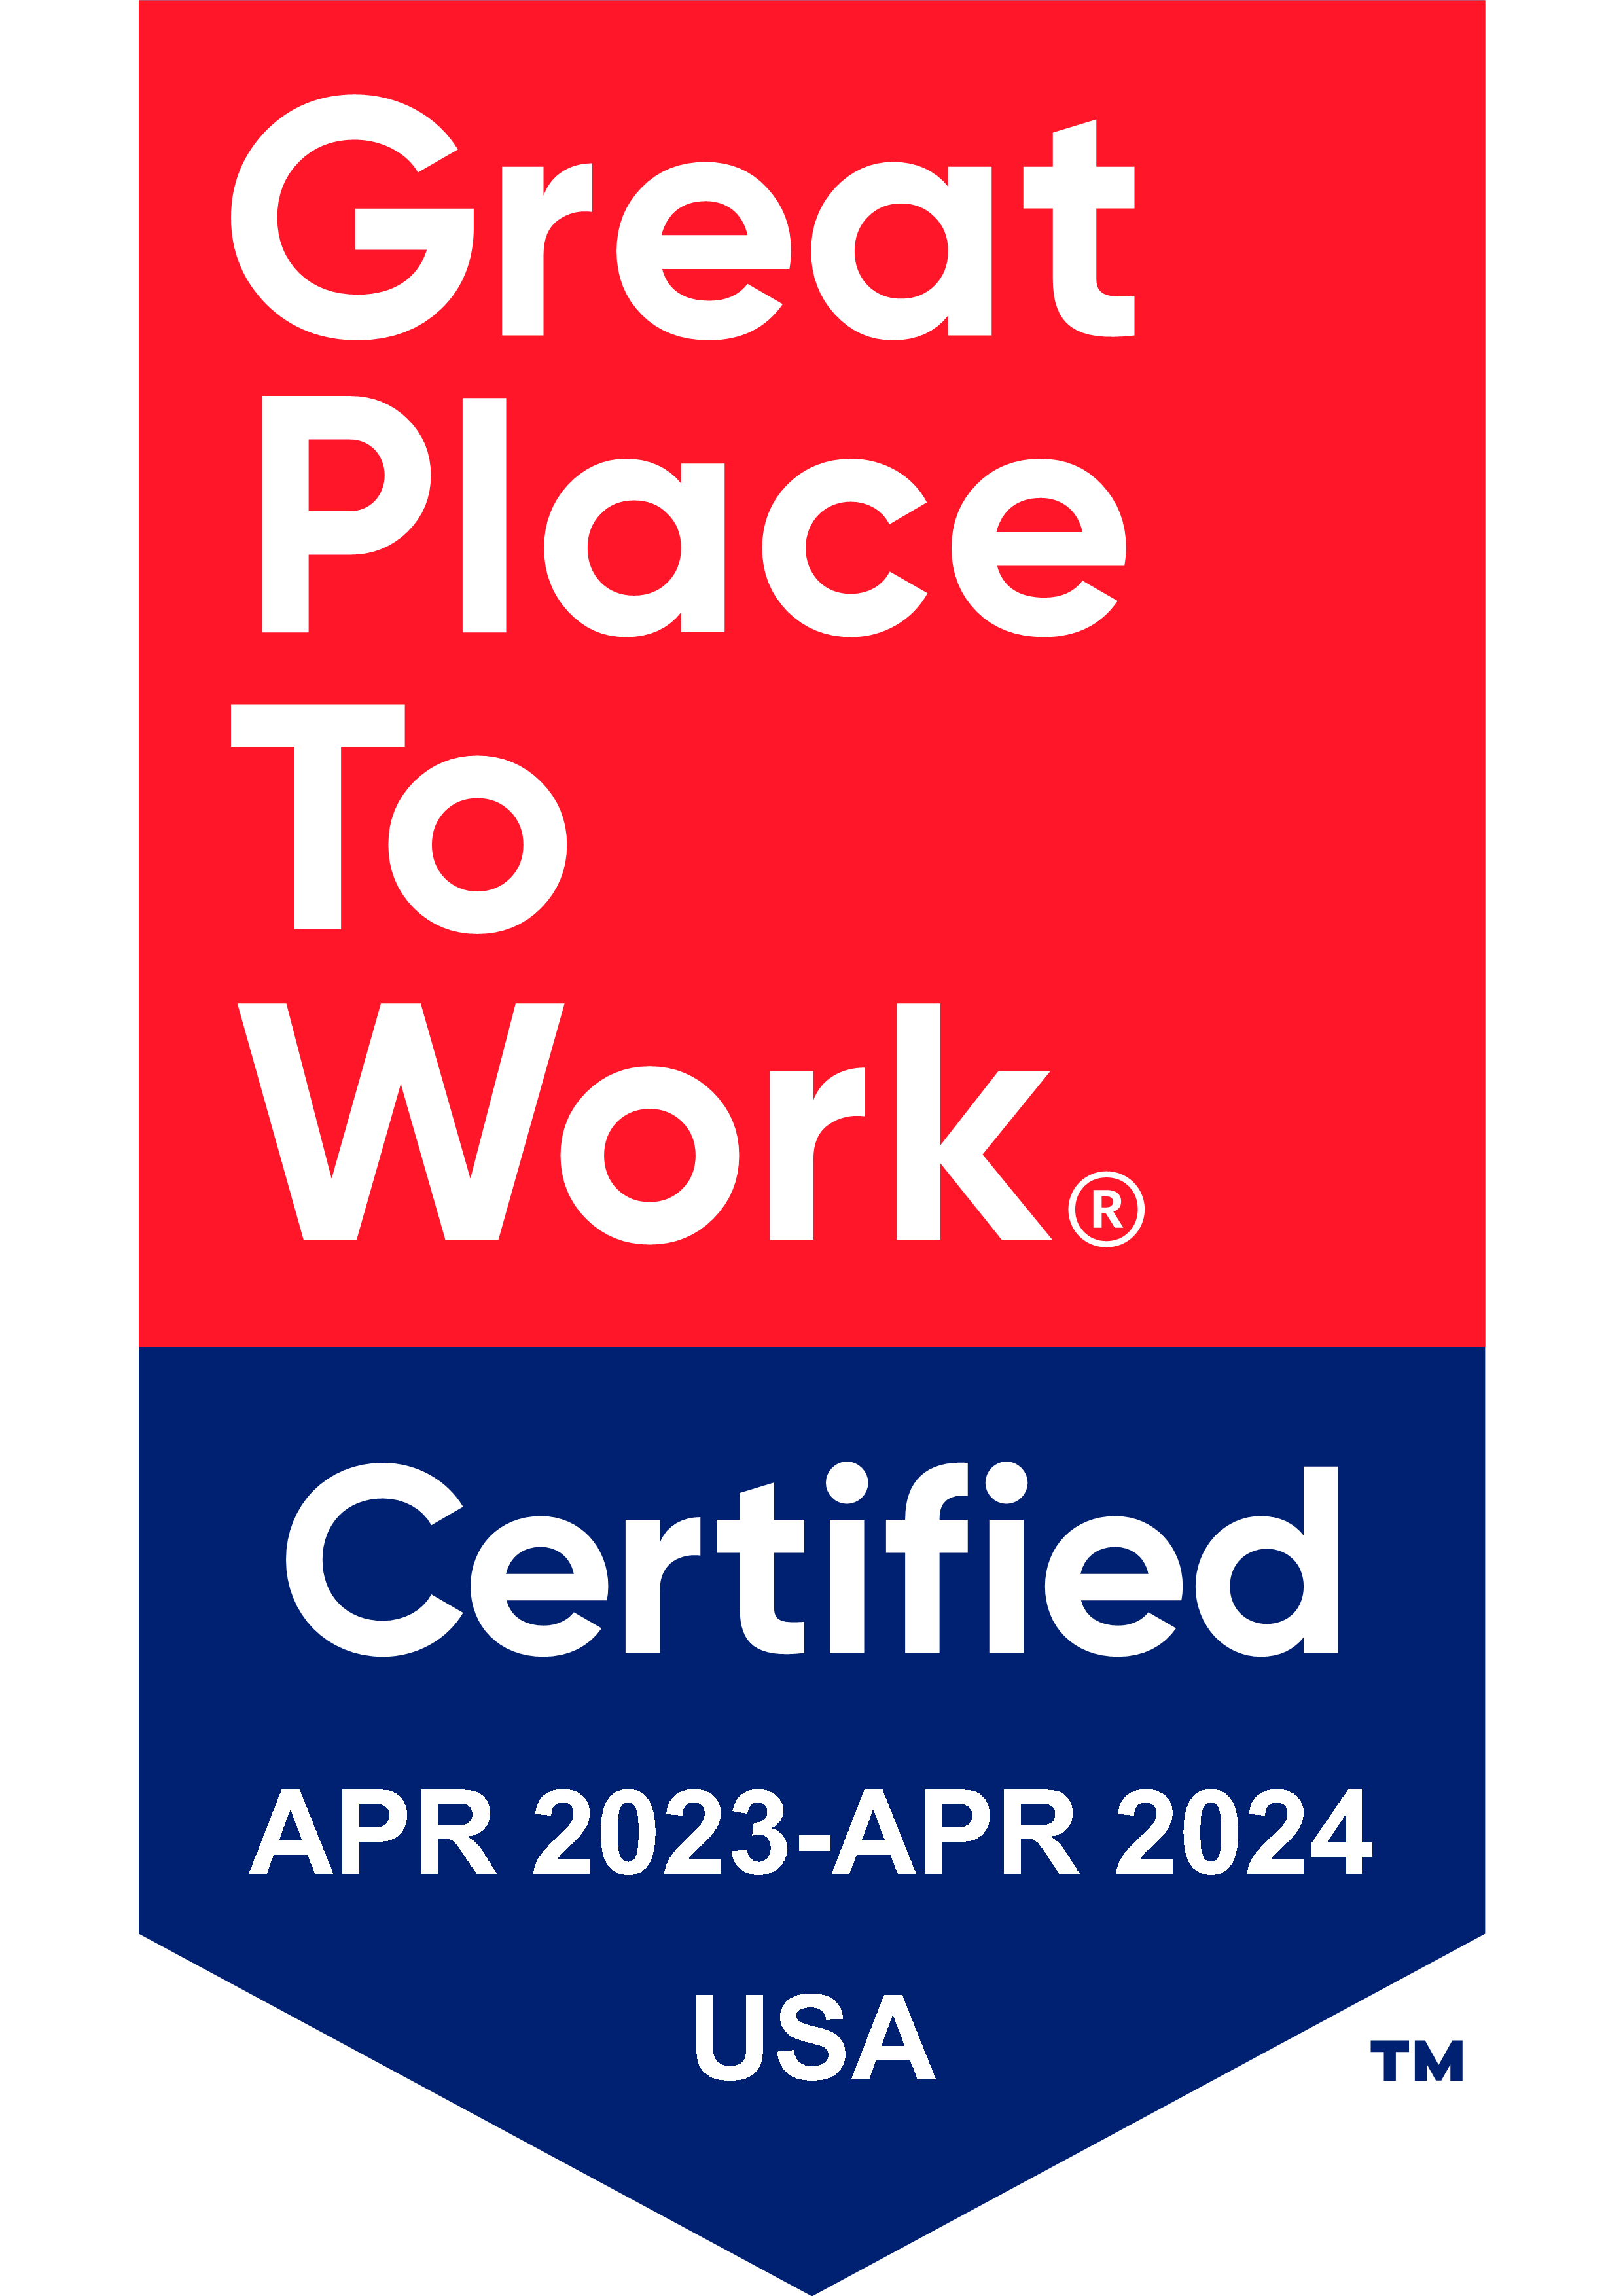 Great Place To Work - Certified Badge